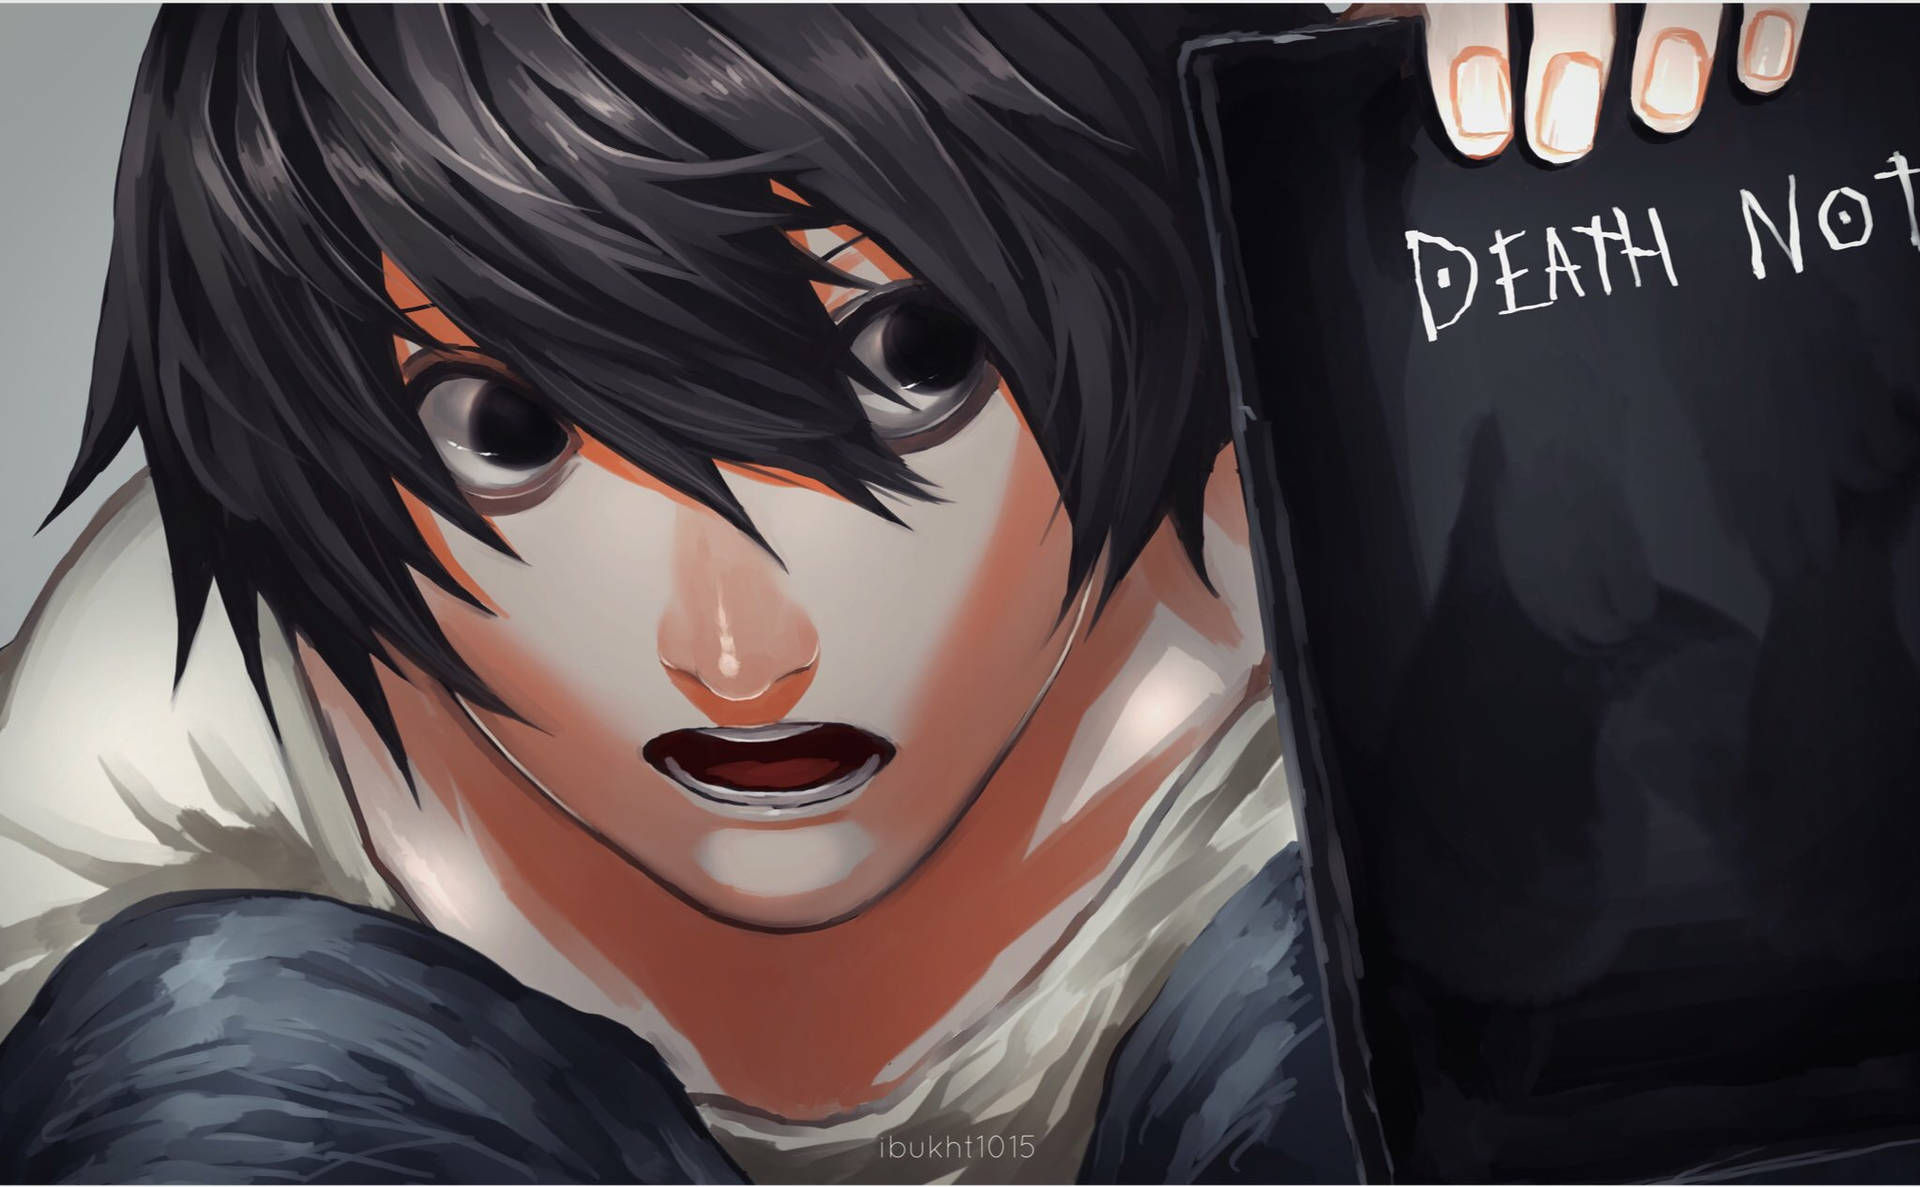 Surprised L Lawliet Holding Death Note Background